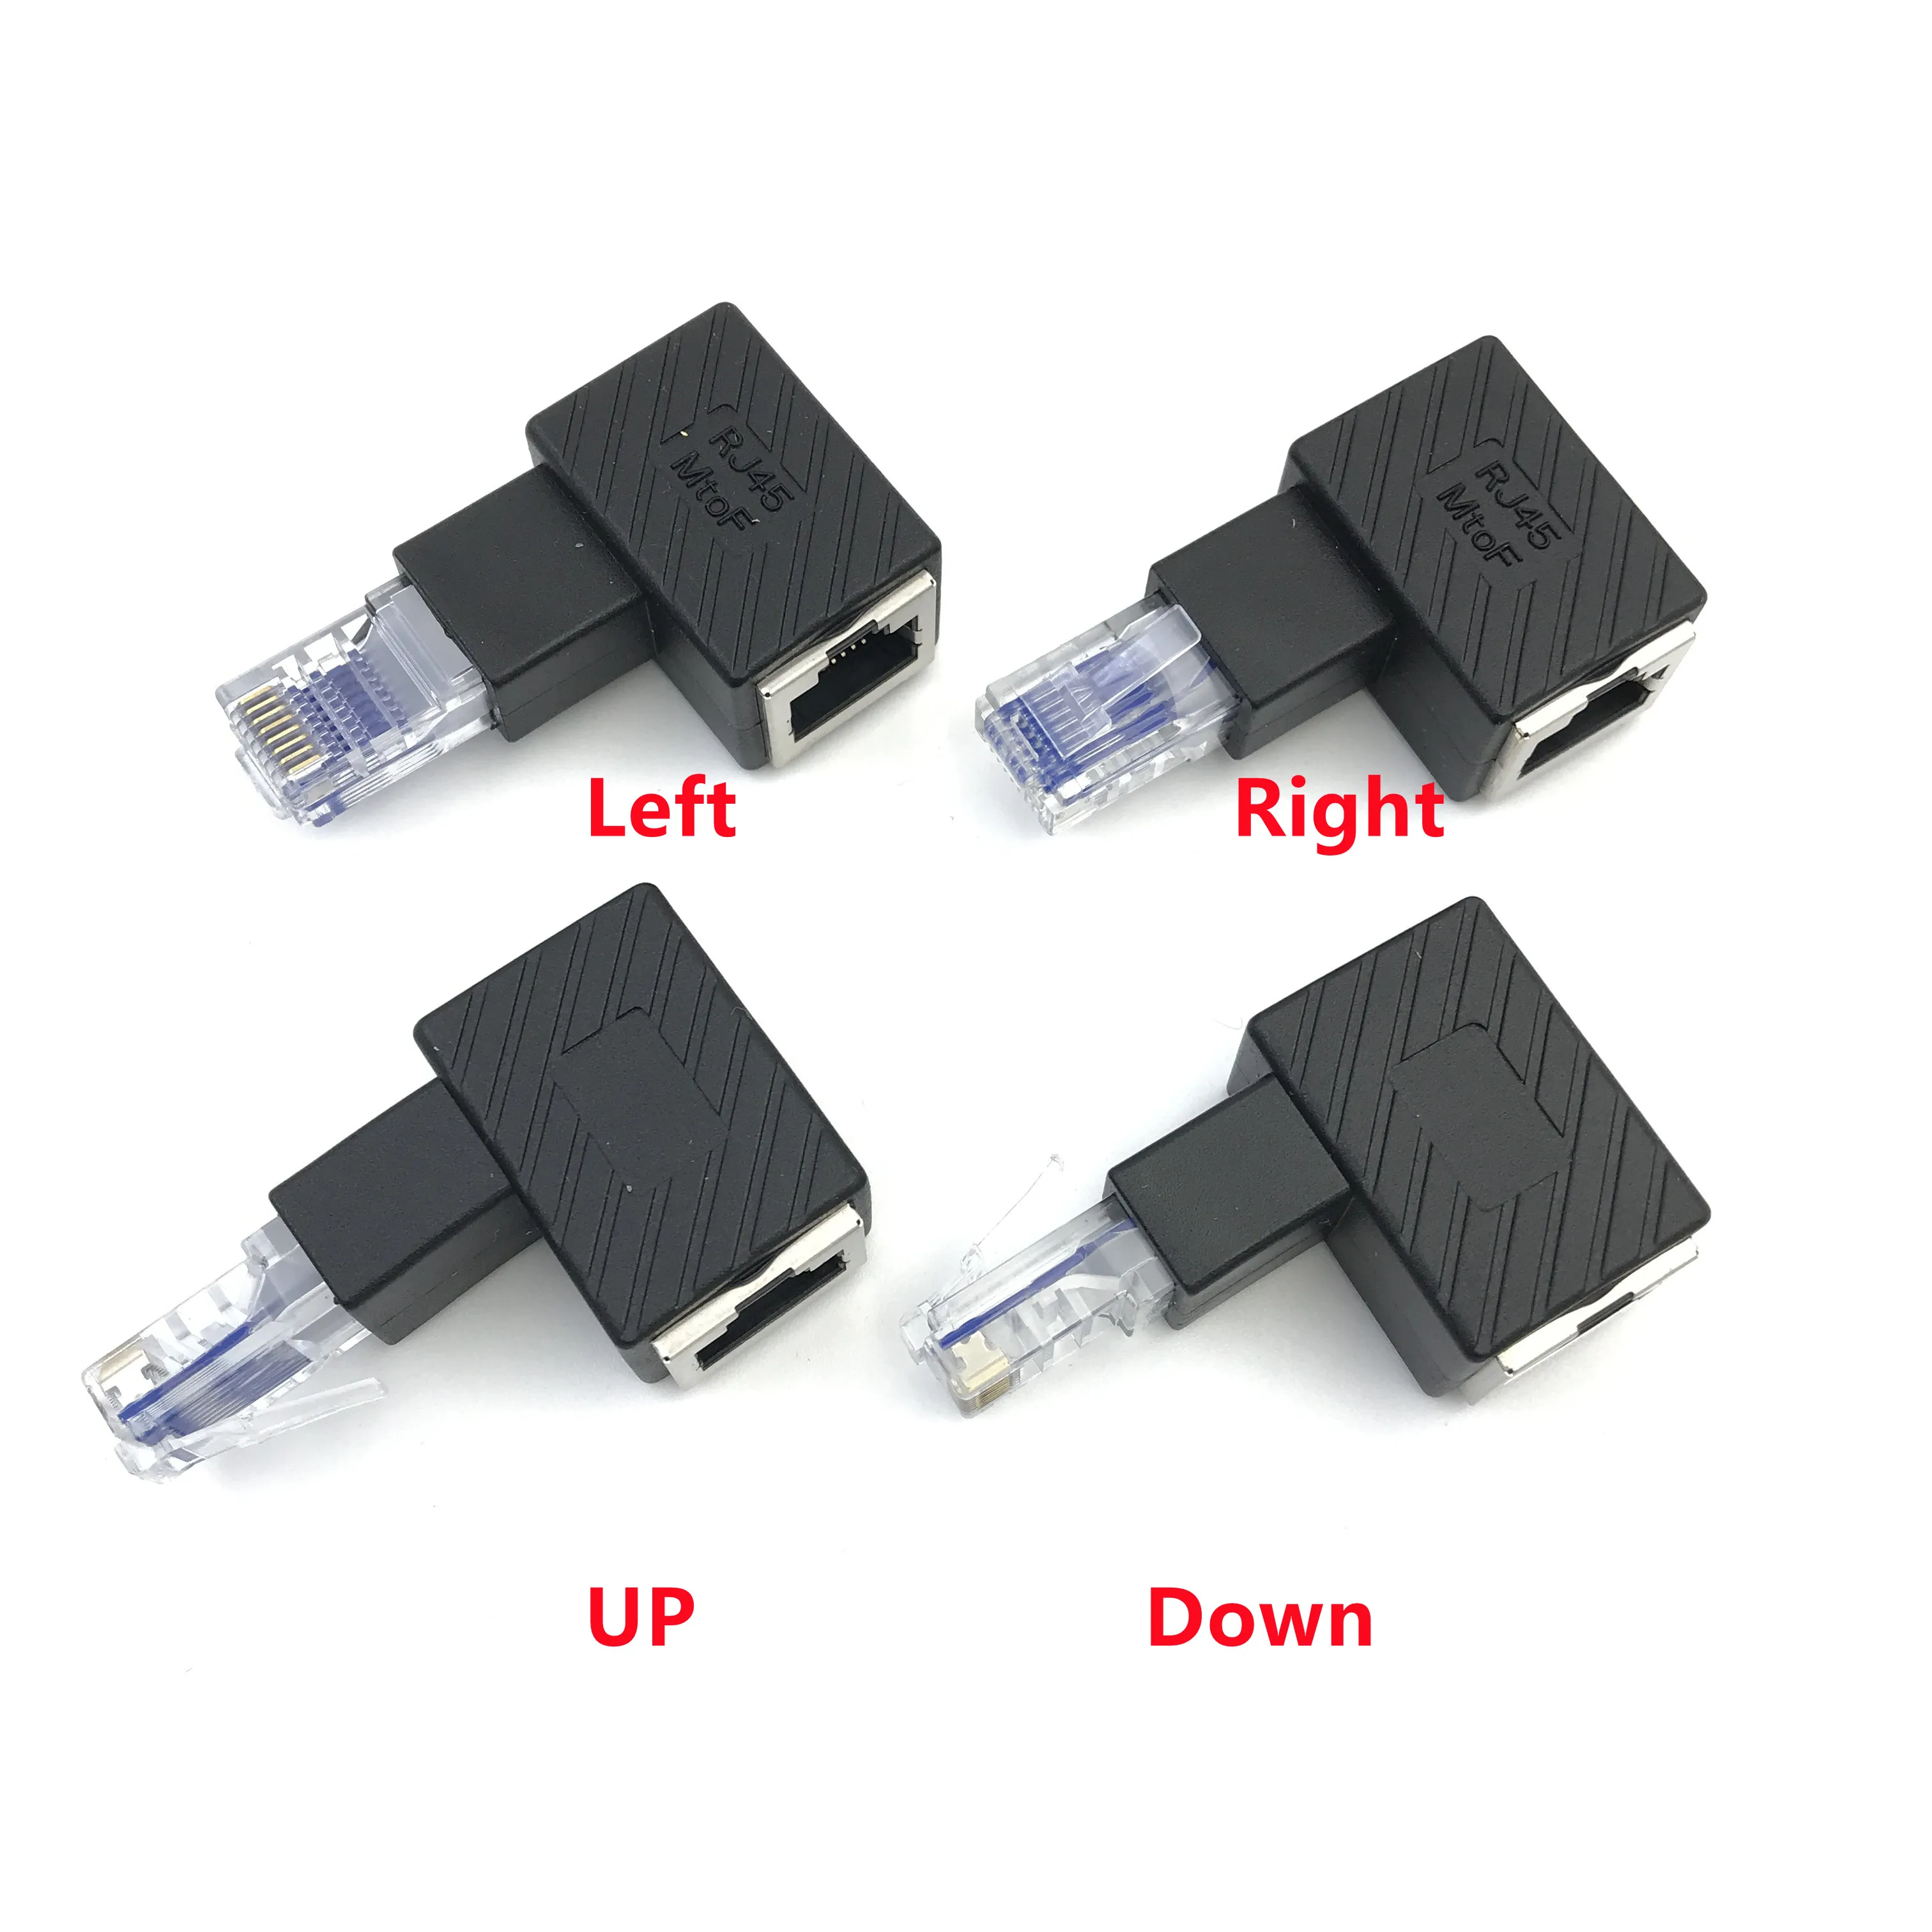 RJ45 Male To Female Converter 90 Degree Extension Adapter for Cat5 Cat6 LAN Ethernet Network Cable Connector Extender